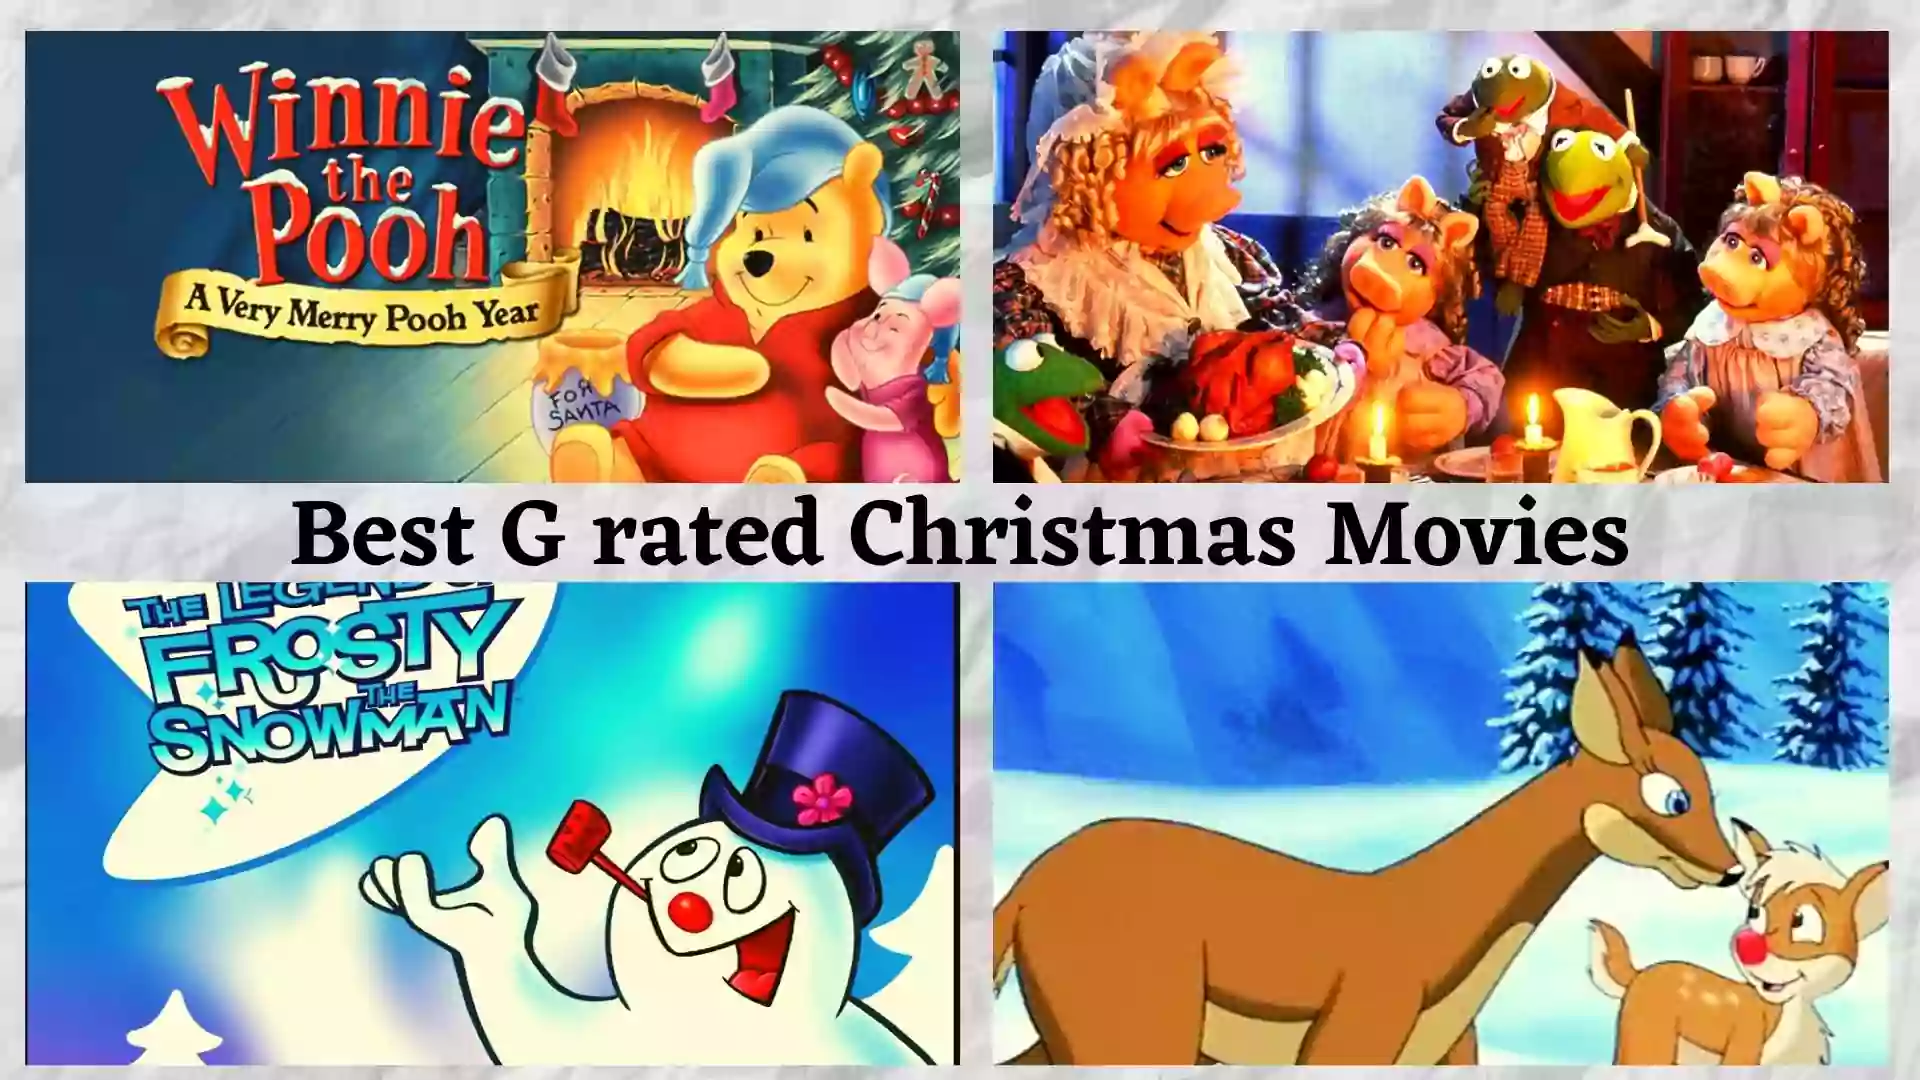 Best G rated Christmas Movies